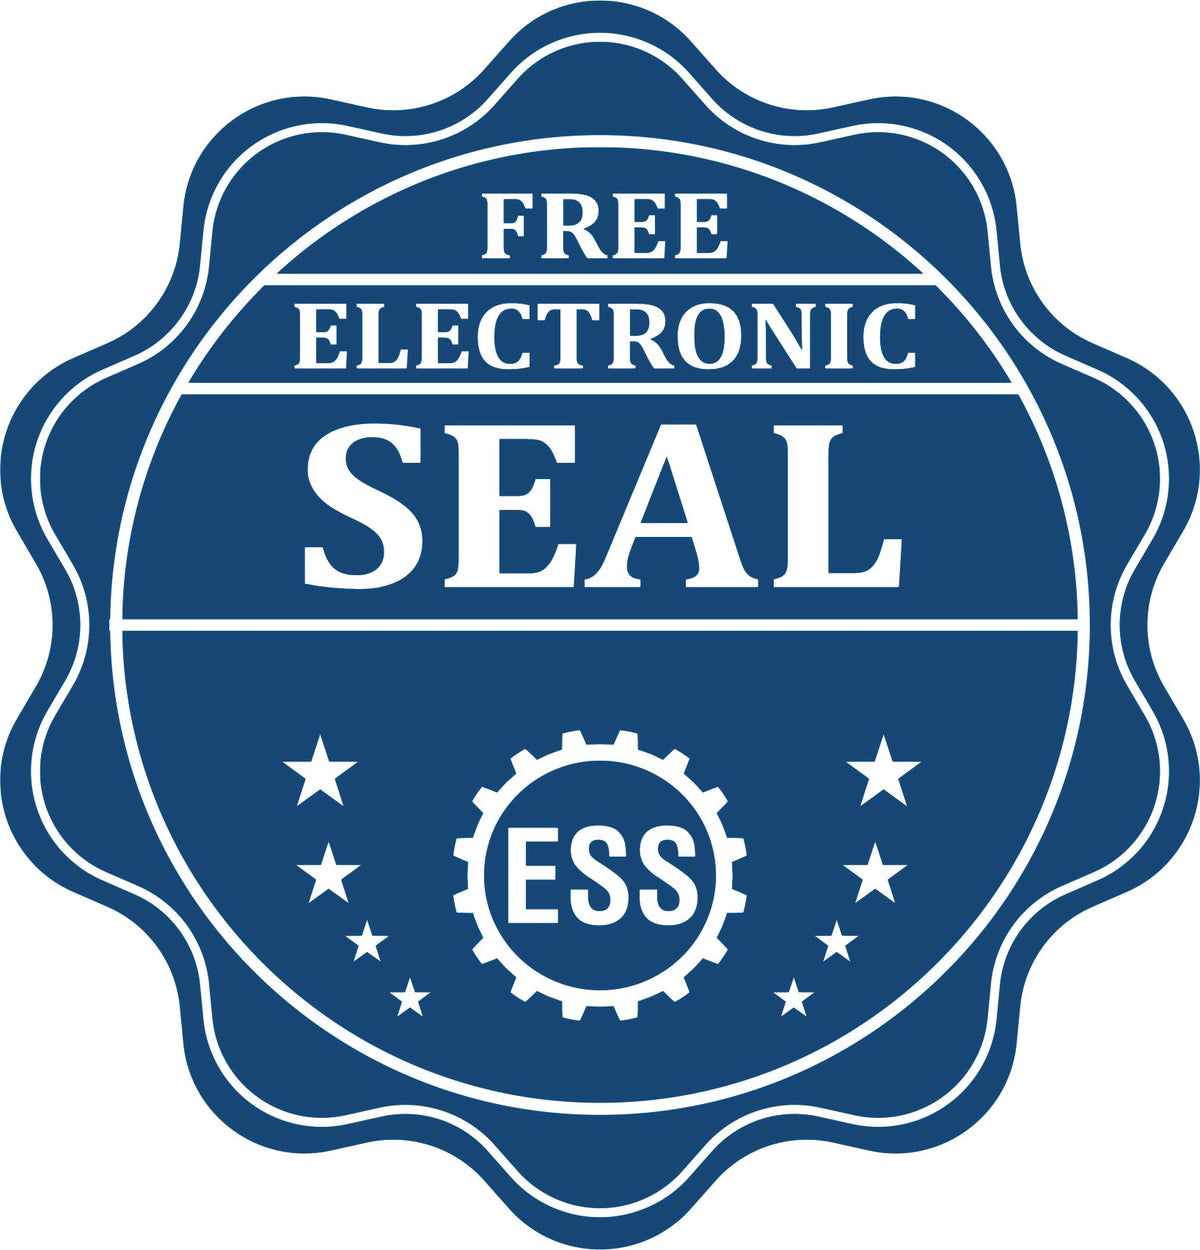 A badge showing a free electronic seal for the Hybrid Pennsylvania Landscape Architect Seal with stars and the ESS gear on the emblem.